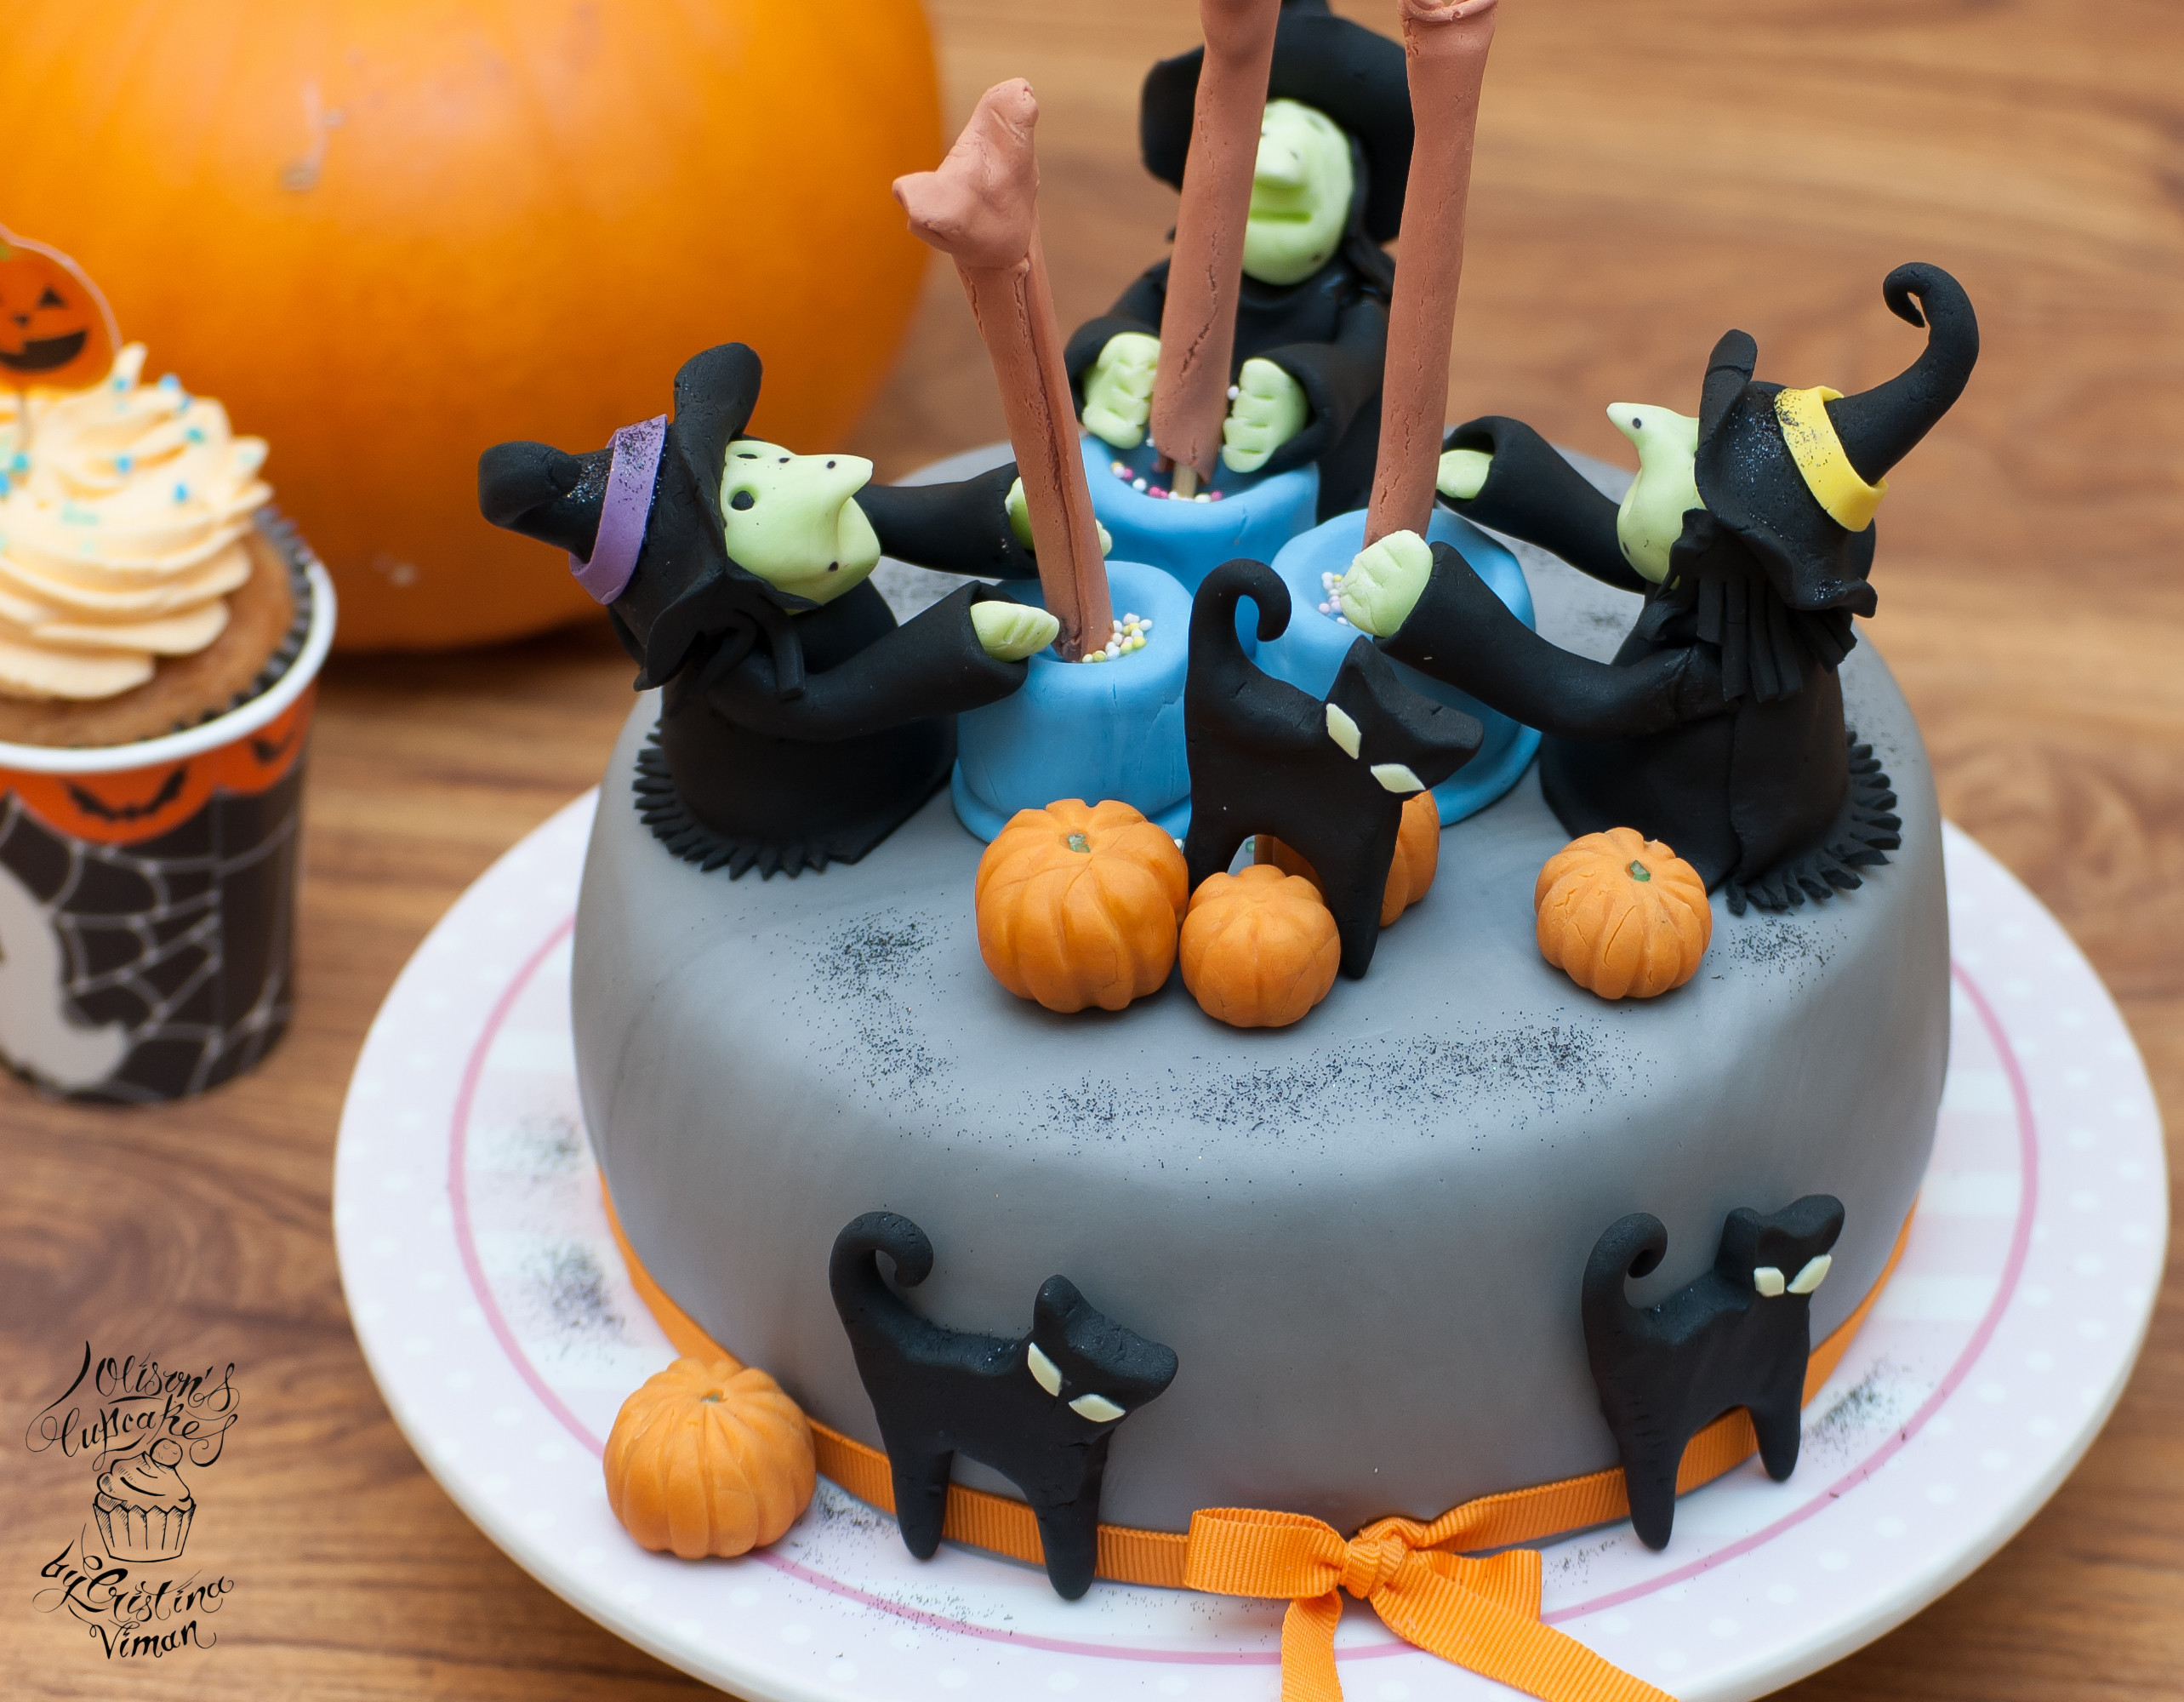 Halloween Cakes And Cupcakes
 Halloween Wicked Witches Cake and Cupcakes – Olison s Cupcakes